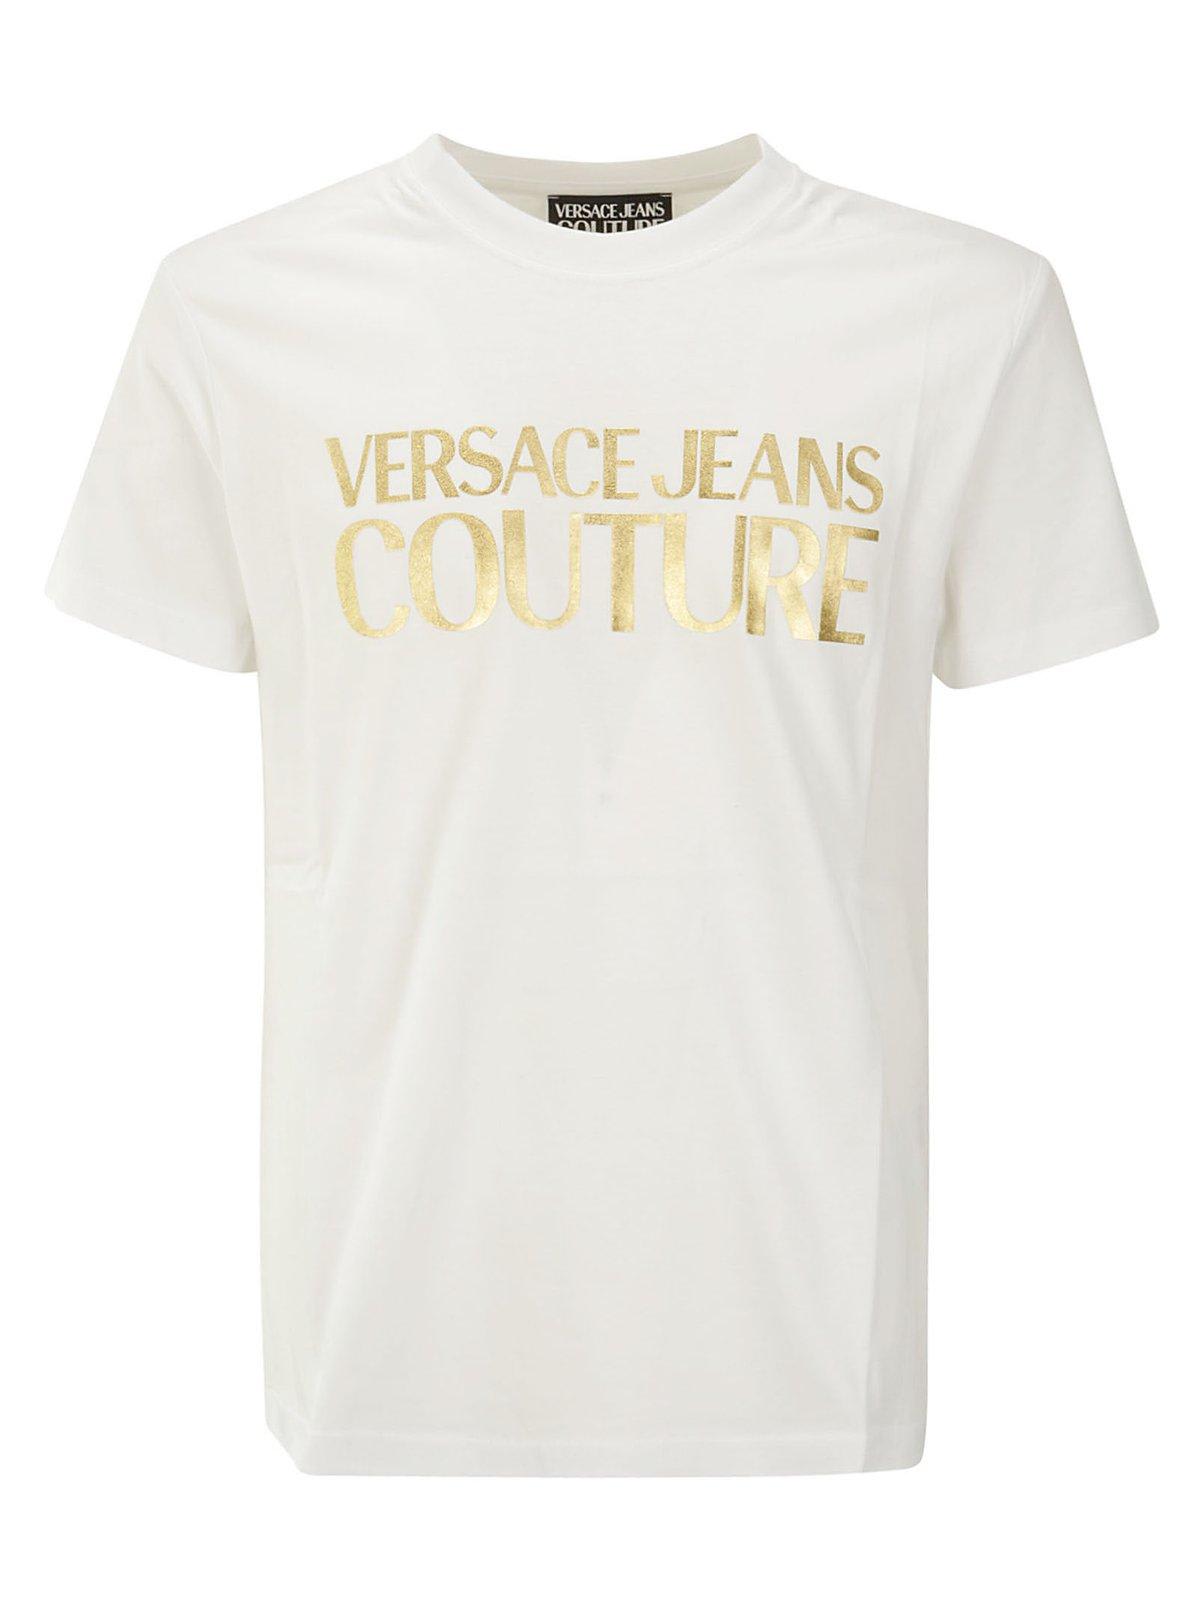 VERSACE JEANS COUTURE LOGO-PRINTED CREWNECK T-SHIRT VERSACE JEANS COUTURE